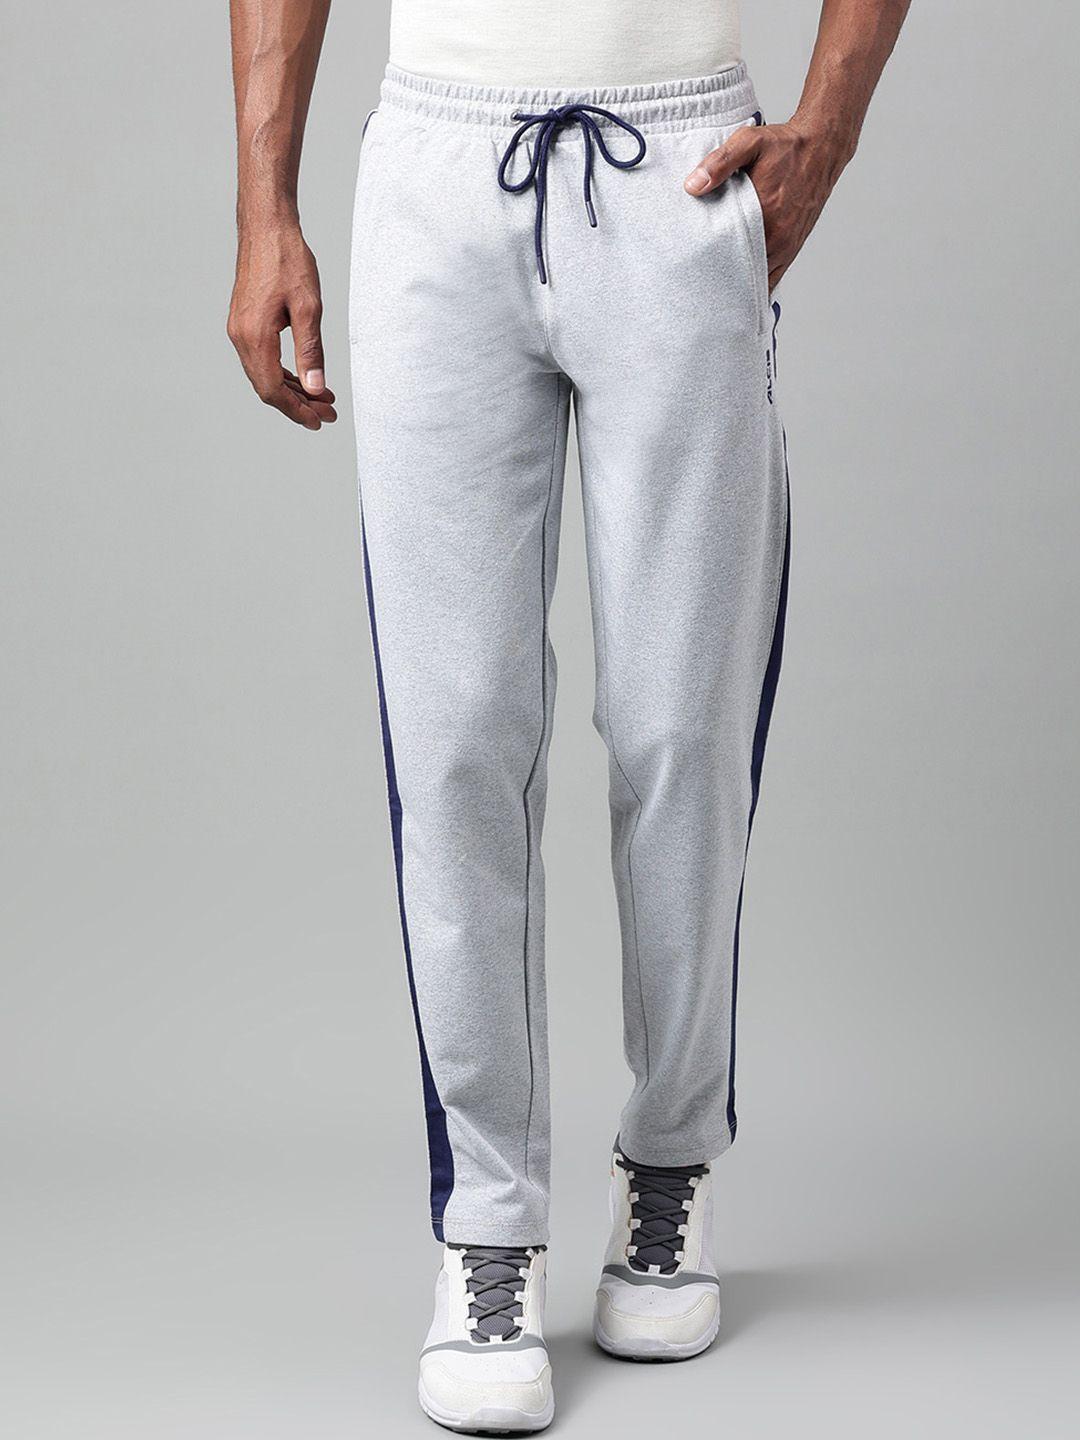 alcis-men-striped-soft-touch-slim-fit-athleisure-sports-track-pants